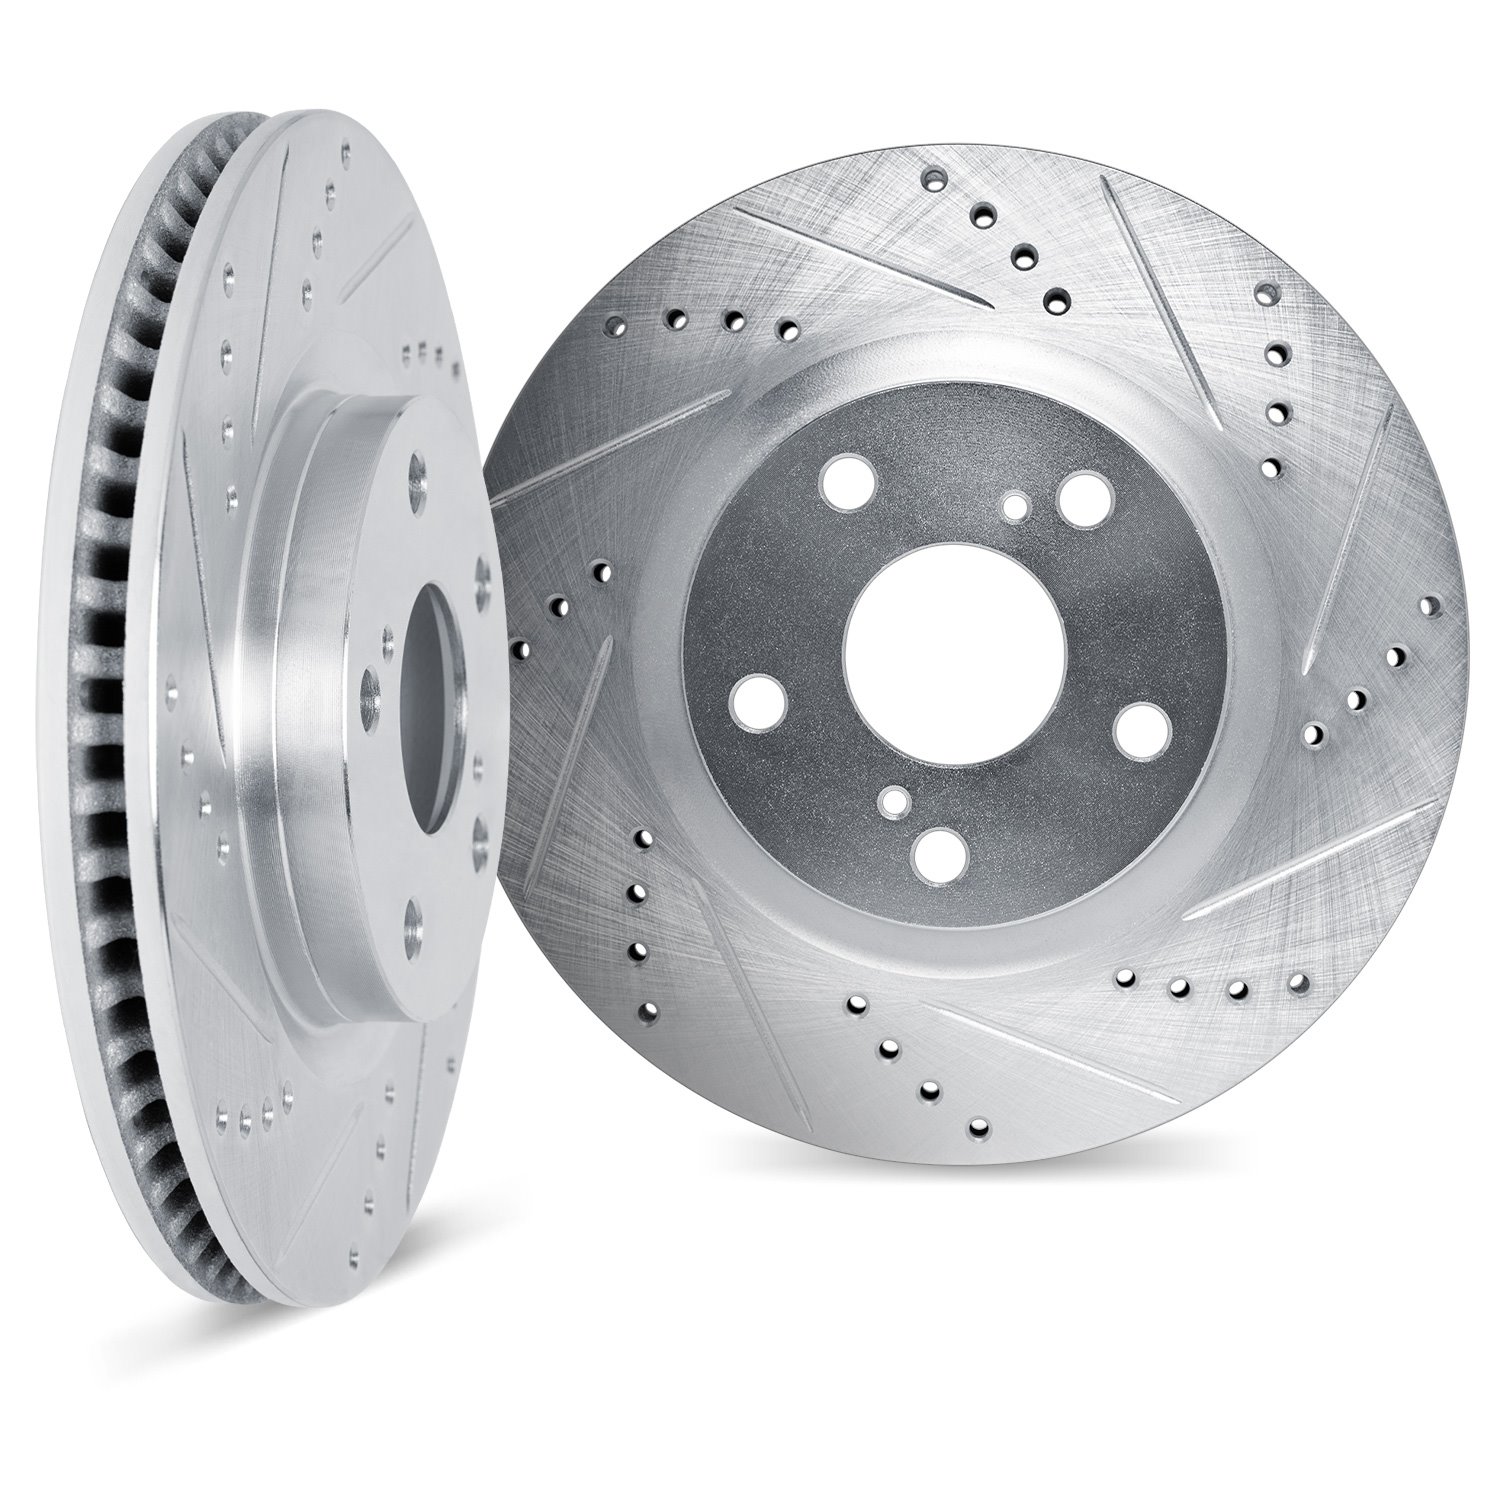 Drilled/Slotted Brake Rotors [Silver], 1991-1997 Lexus/Toyota/Scion